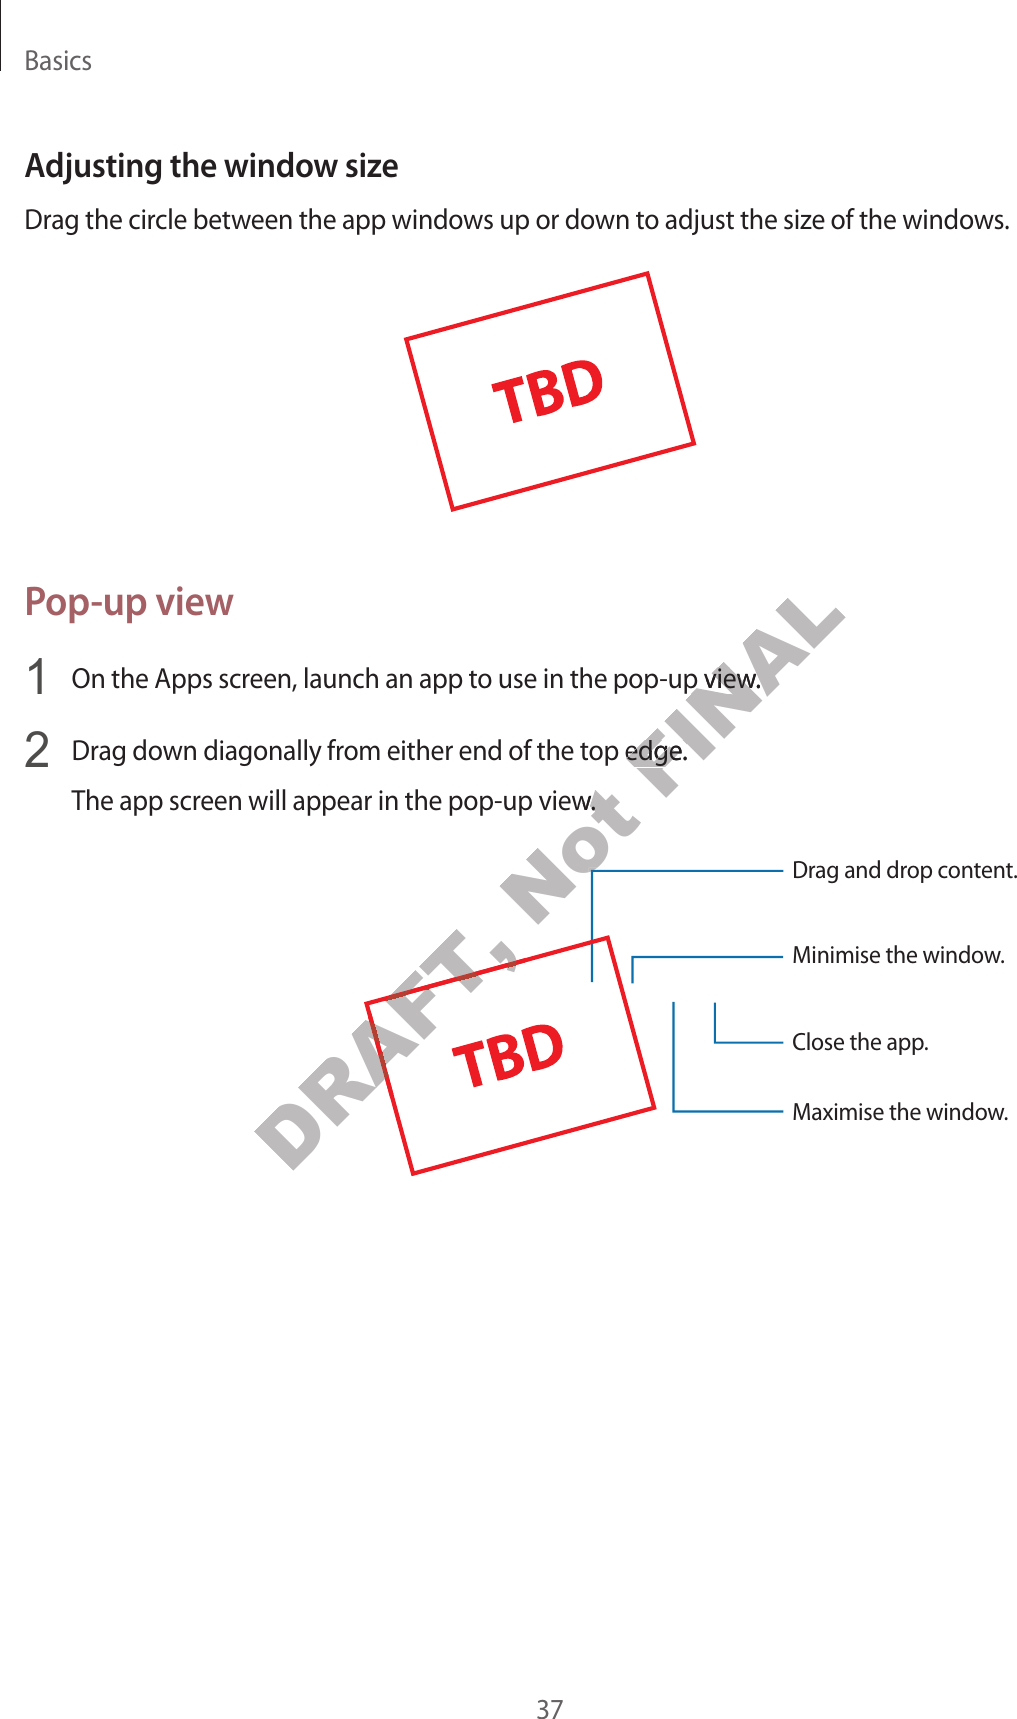 Basics37Adjusting the windo w siz eDrag the circle between the app windo w s up or down t o adjust the siz e of the window s .Pop-up view1  On the Apps screen, launch an app t o use in the pop-up view.2  Drag down diagonally fr om either end of the t op edge .The app screen will appear in the pop-up view.Minimise the window.Close the app .Maximise the window.Drag and drop c ont ent.DRAFT, DRAFT, Not The app screen will appear in the pop-up view.Not The app screen will appear in the pop-up view.Not Not FINALOn the Apps screen, launch an app t o use in the pop-up view.FINALOn the Apps screen, launch an app t o use in the pop-up view.Drag down diagonally fr om either end of the t op edge .FINALDrag down diagonally fr om either end of the t op edge .